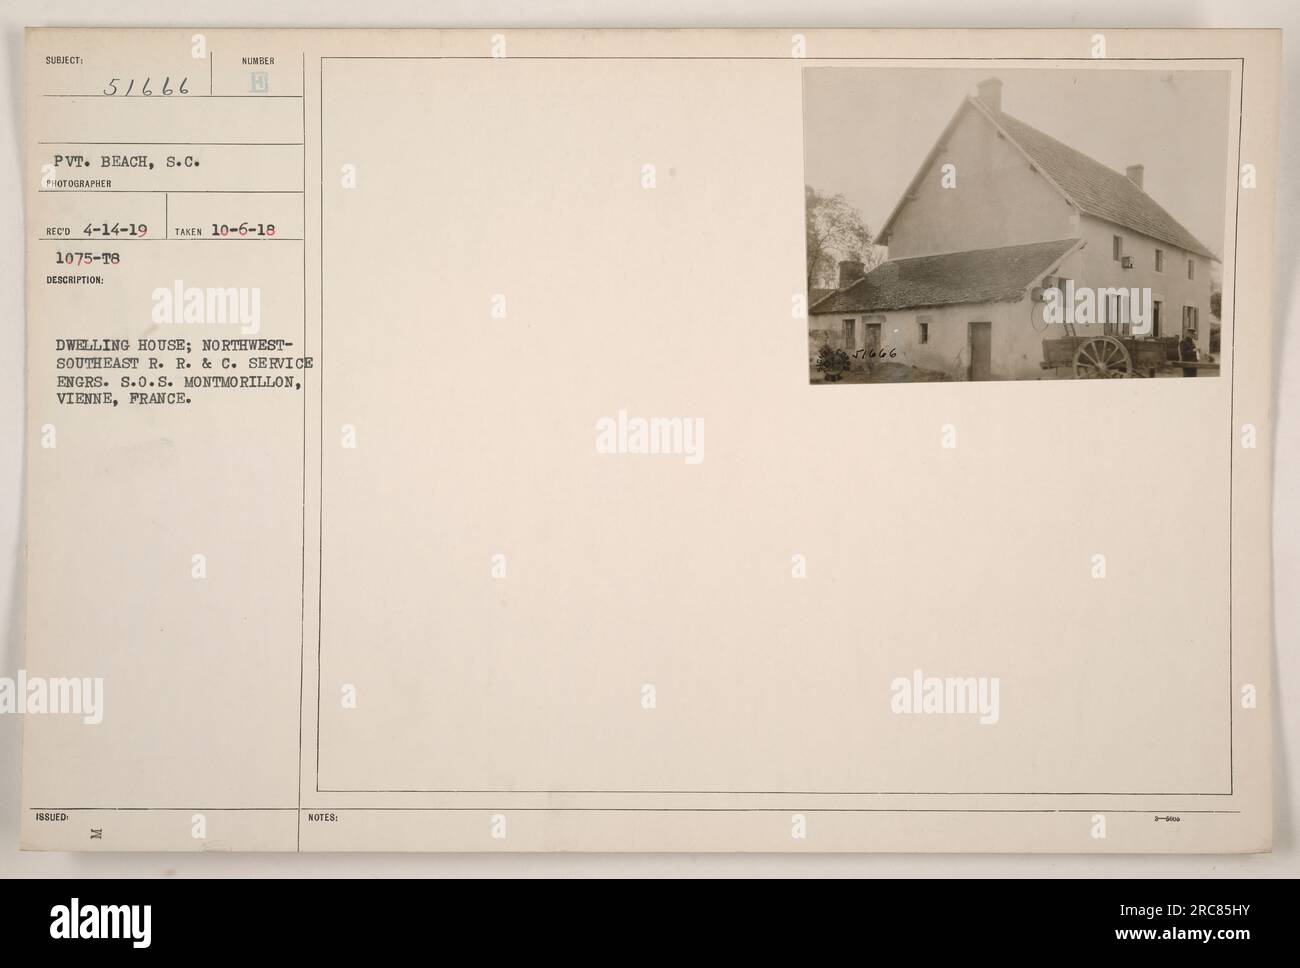 This photograph depicts a dwelling house located near the Northwest-Southeast R.R. & C. Service Engrs. S.O.S. Montmorillon in Vienne, France. The photograph was taken on October 6, 1918, by Private Beach of South Carolina. The description number is B, and it was issued as part of a collection identified as 1075-T8. Stock Photo